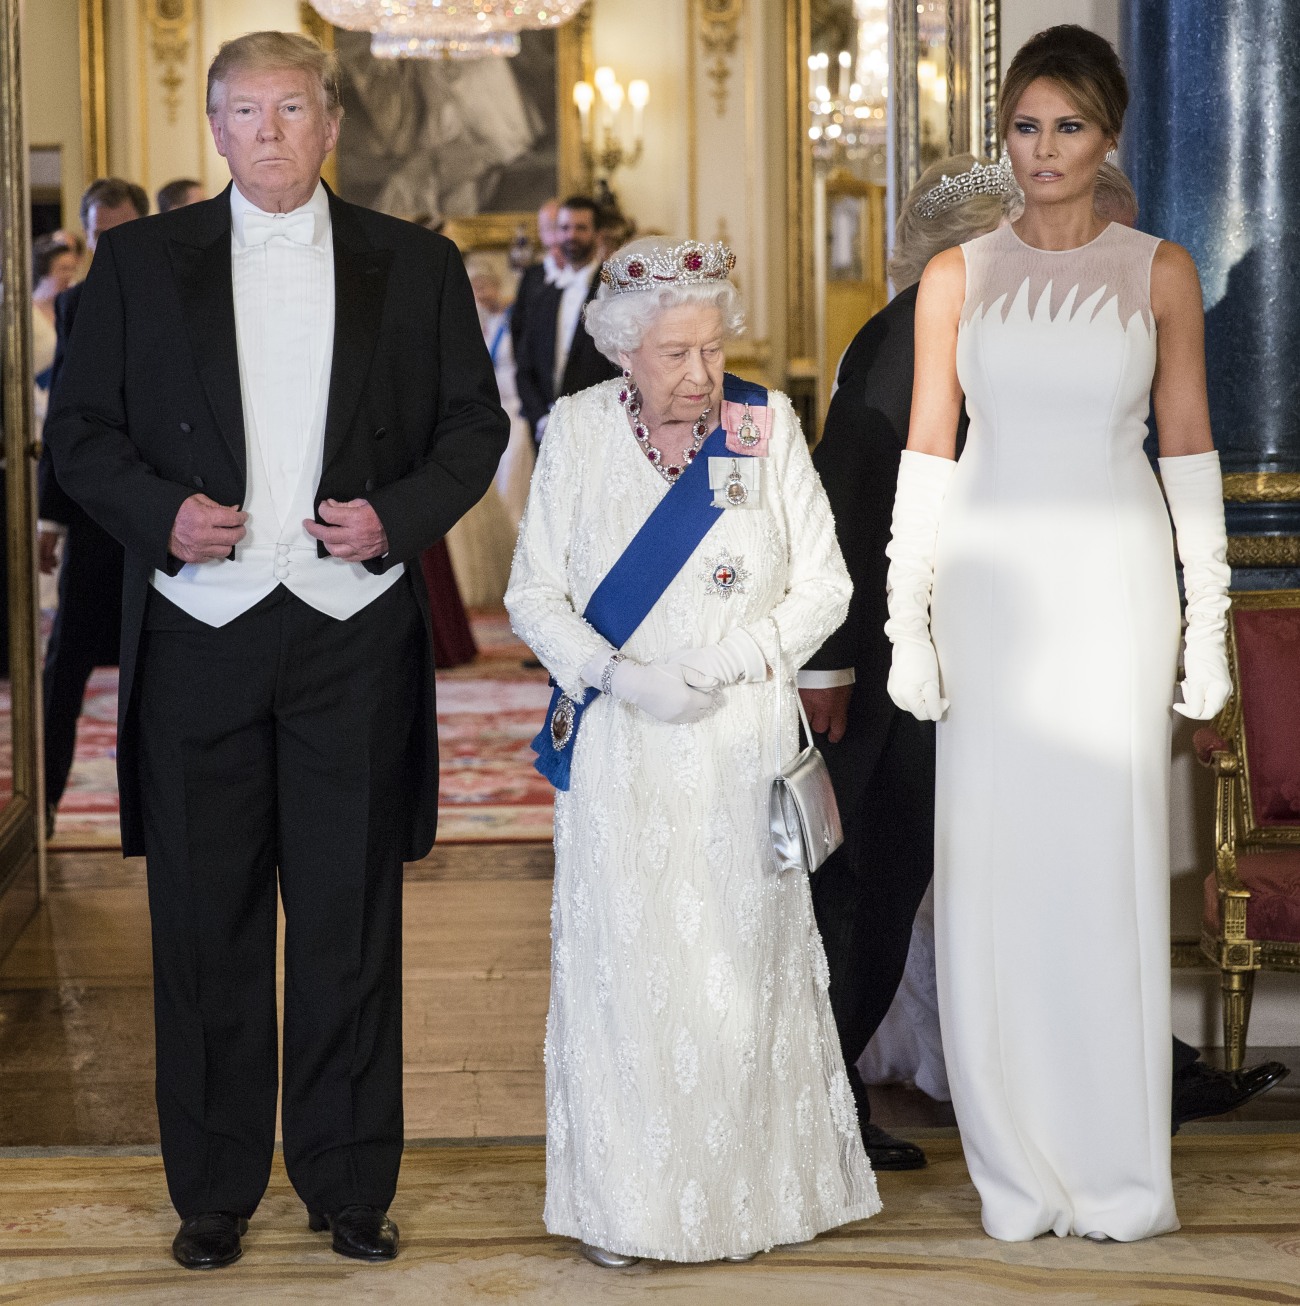 ROYAL ROTA Her Majesty The Queen and President of The United States of America at State Banquet, Buckingham Palace, London, England, UK